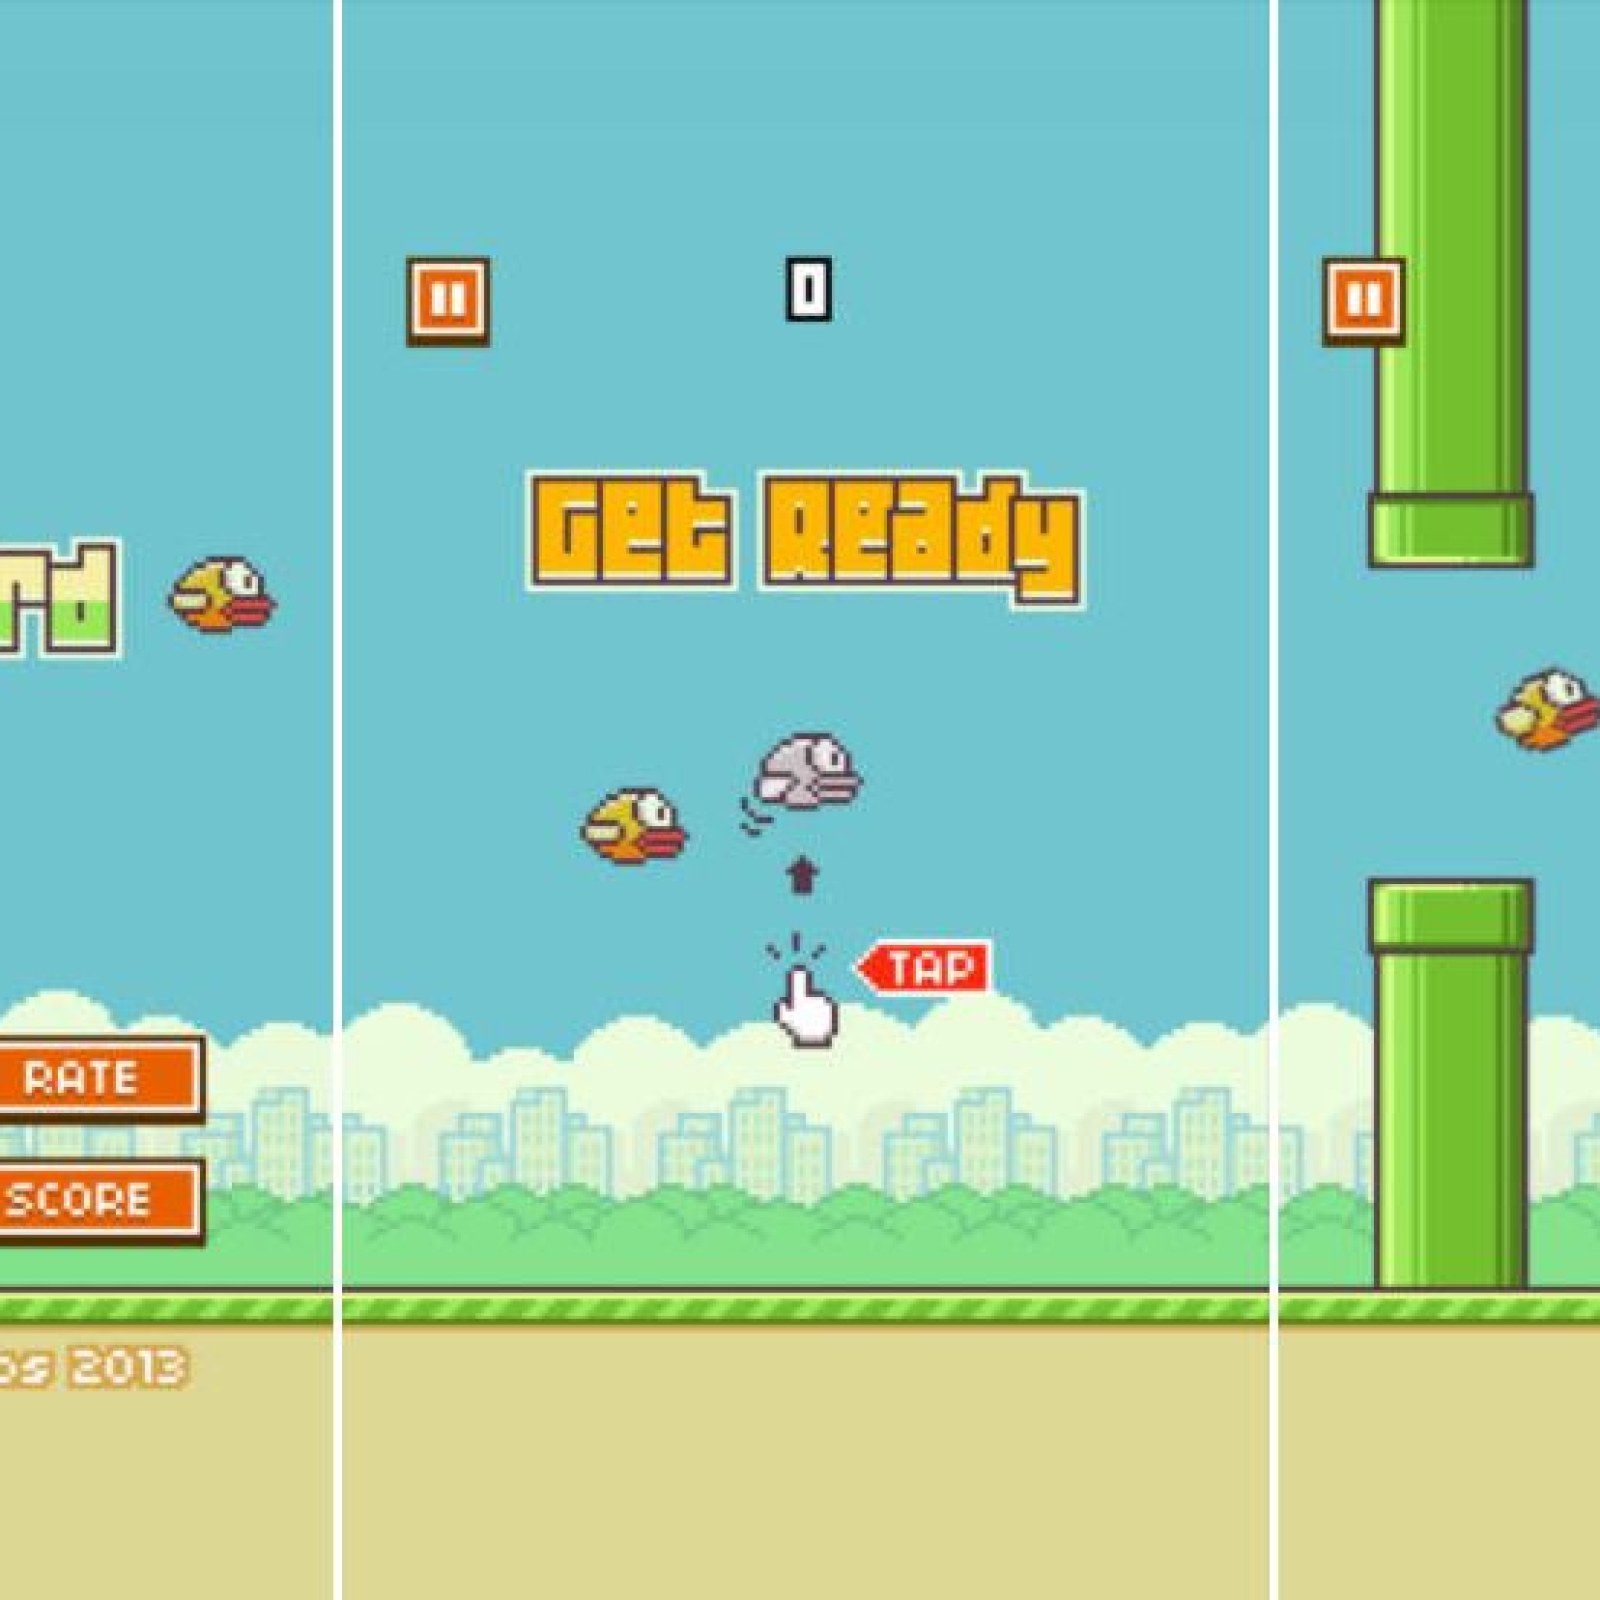 Flappy Bird Creator Reveals Why He Pulled the App, 'Considering' Returning Flappy  Bird to App Store - MacRumors